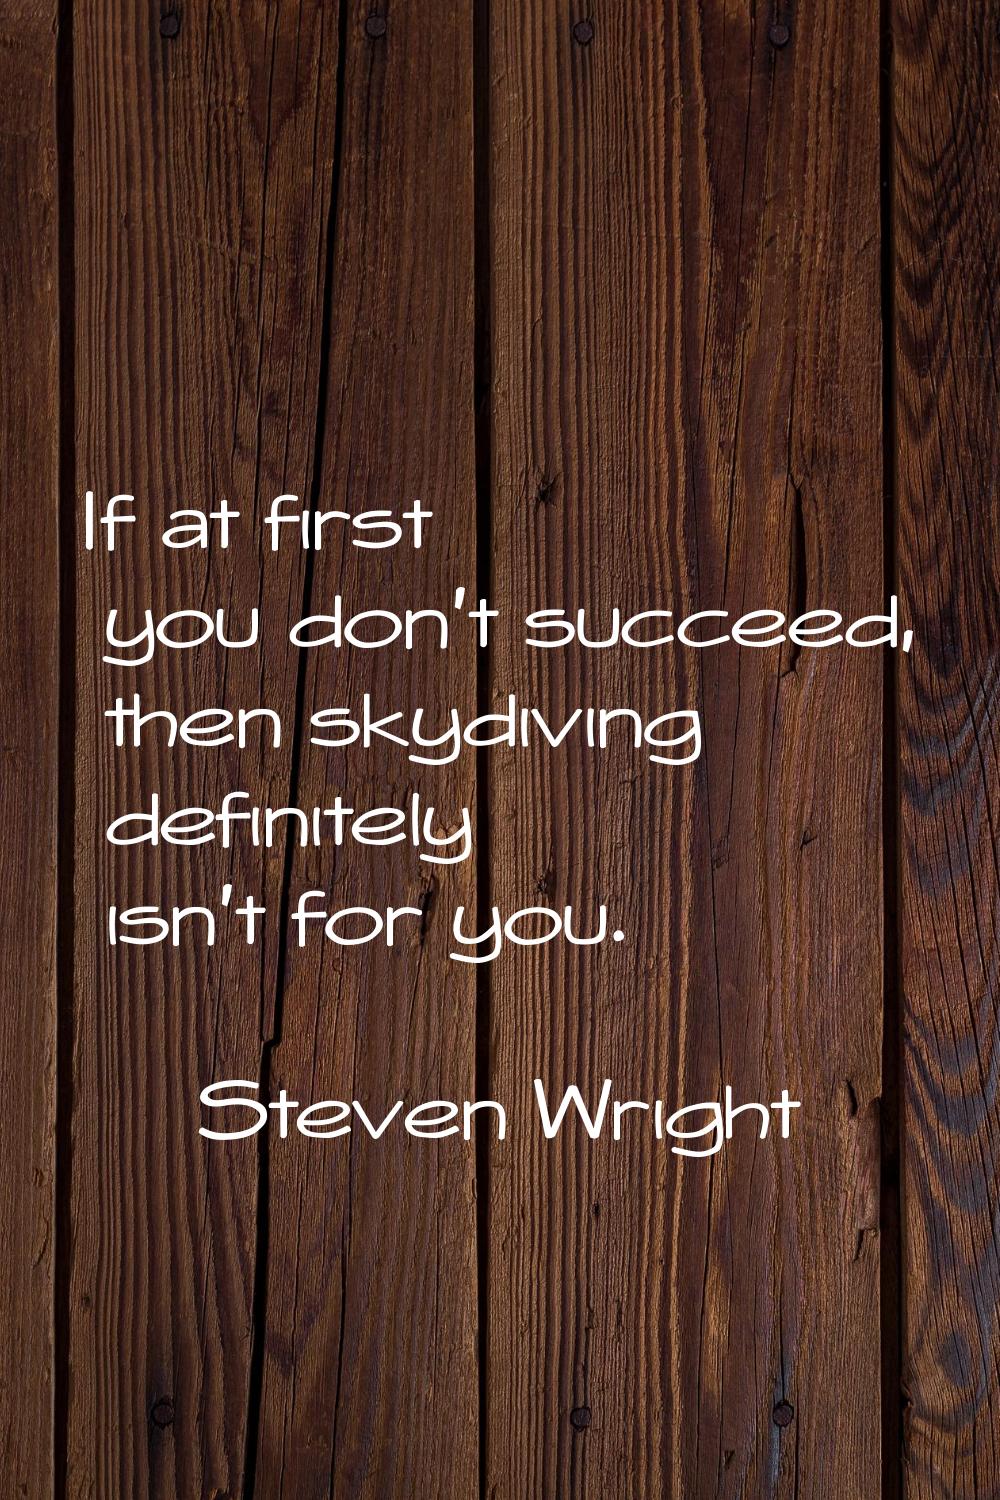 If at first you don't succeed, then skydiving definitely isn't for you.